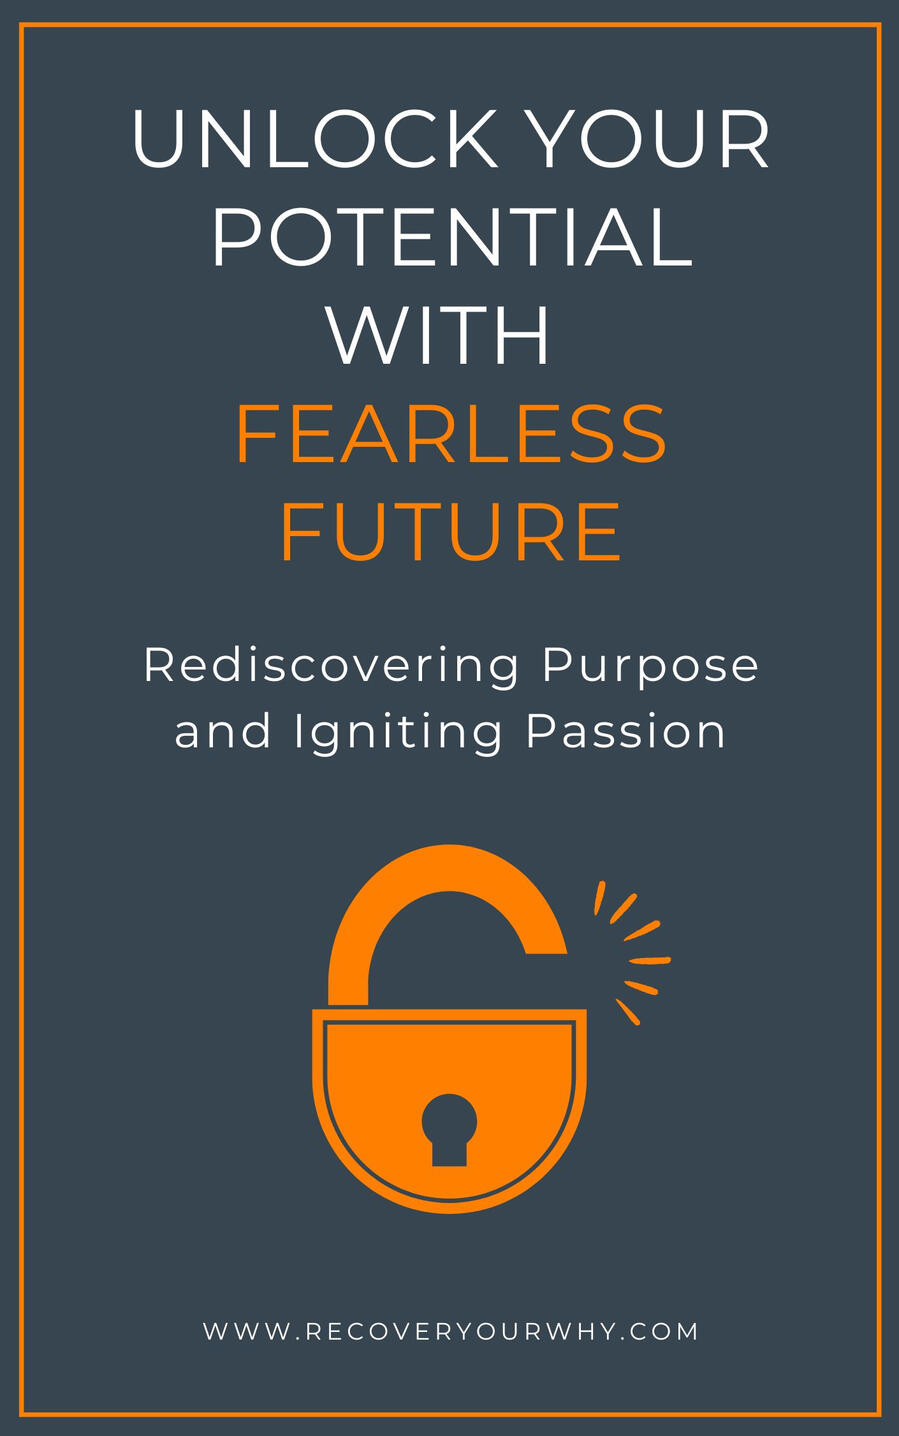 A motivational banner with bold text reading "Unlock Your Potential With Fearless Future: Rediscovering Purpose and Igniting Passion," conveying the excitement of personal growth and transformation through embracing challenges and finding your true purpose